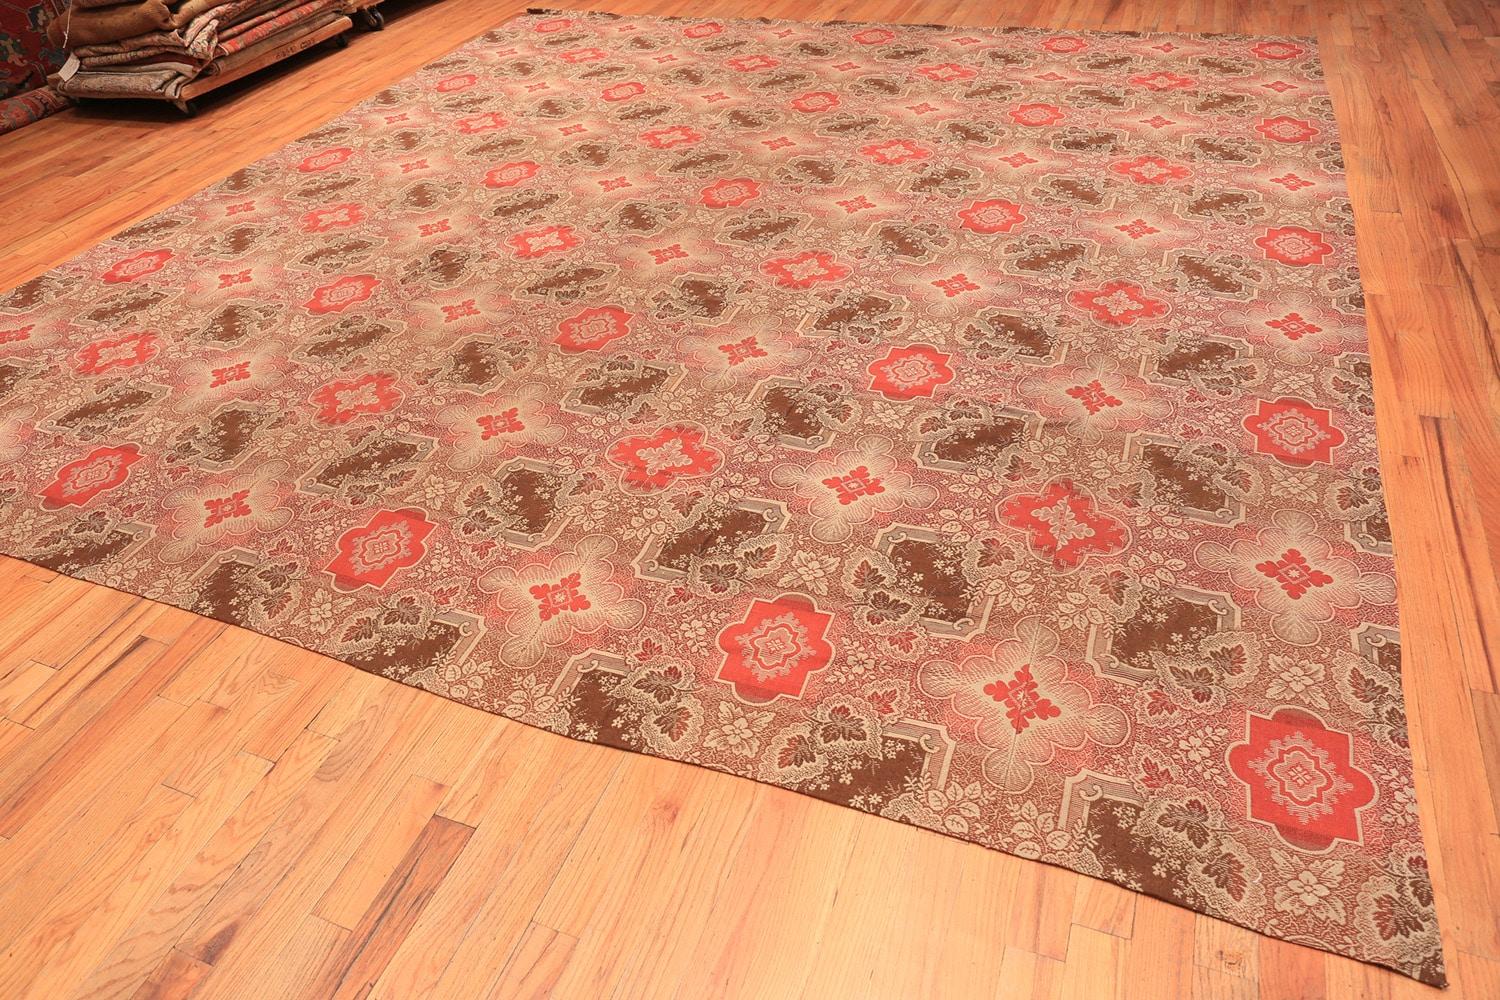 Wool Large Antique American Ingrain Rug. Size: 13 ft 4 in x 14 ft 5 in